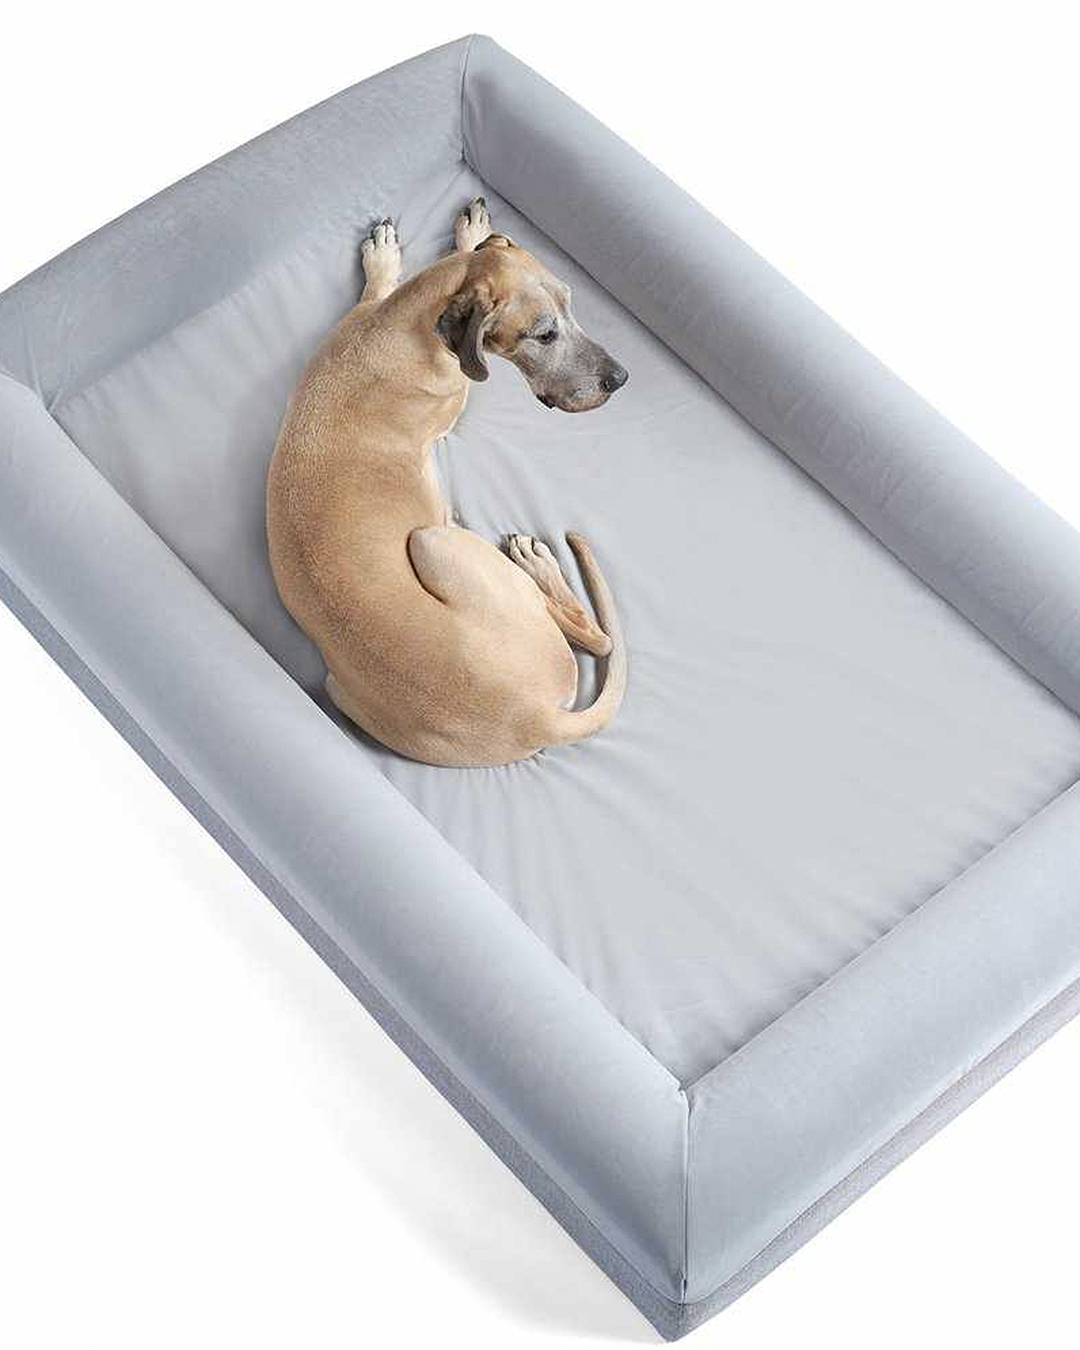 The XXL Barney Dog bed.